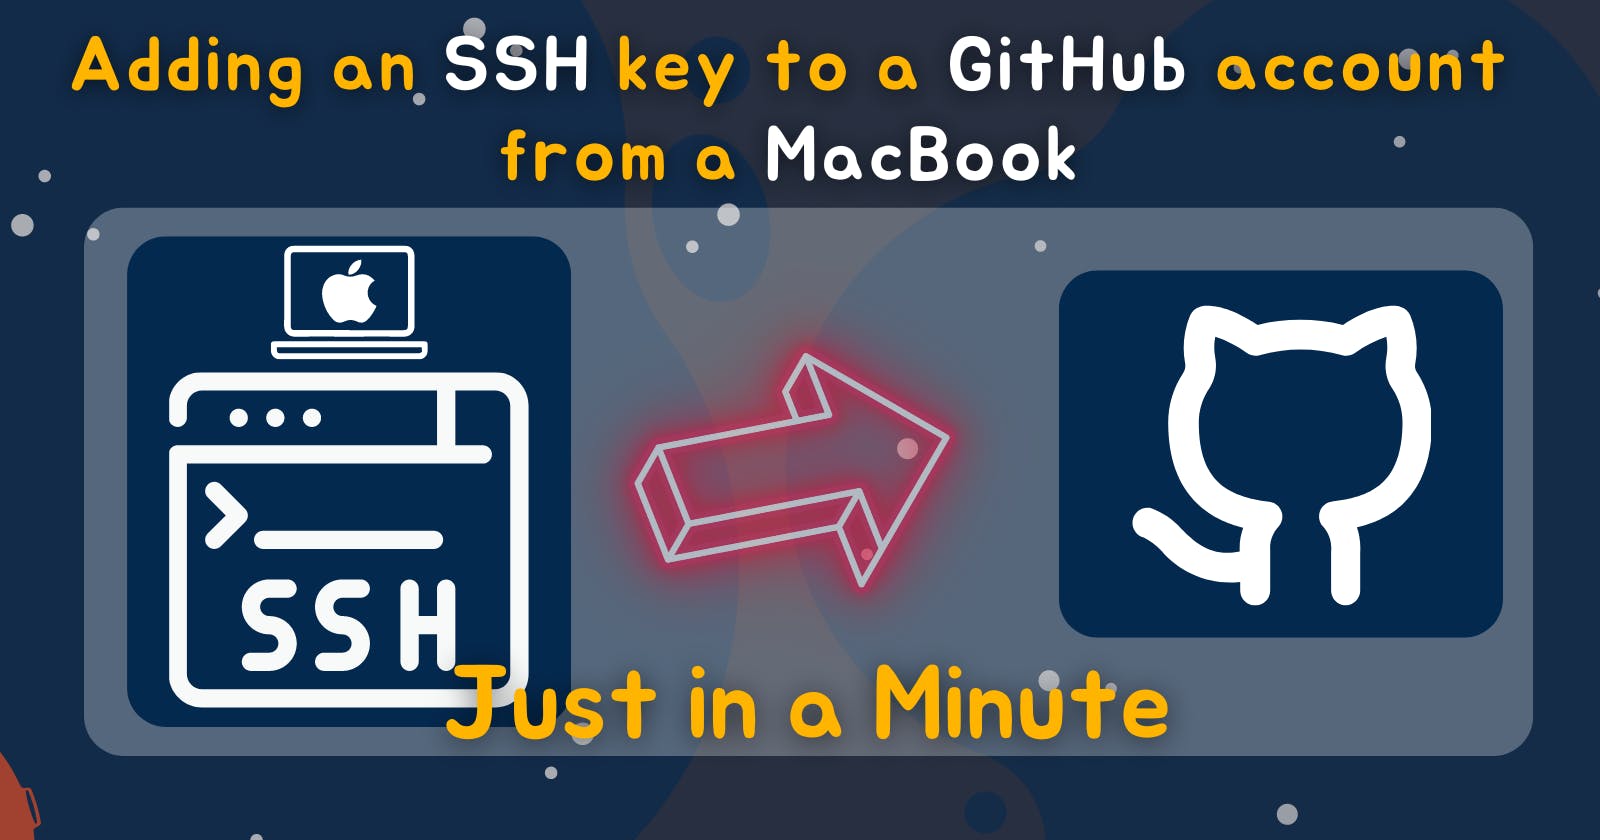 Adding an SSH key to your GitHub account from a MacBook